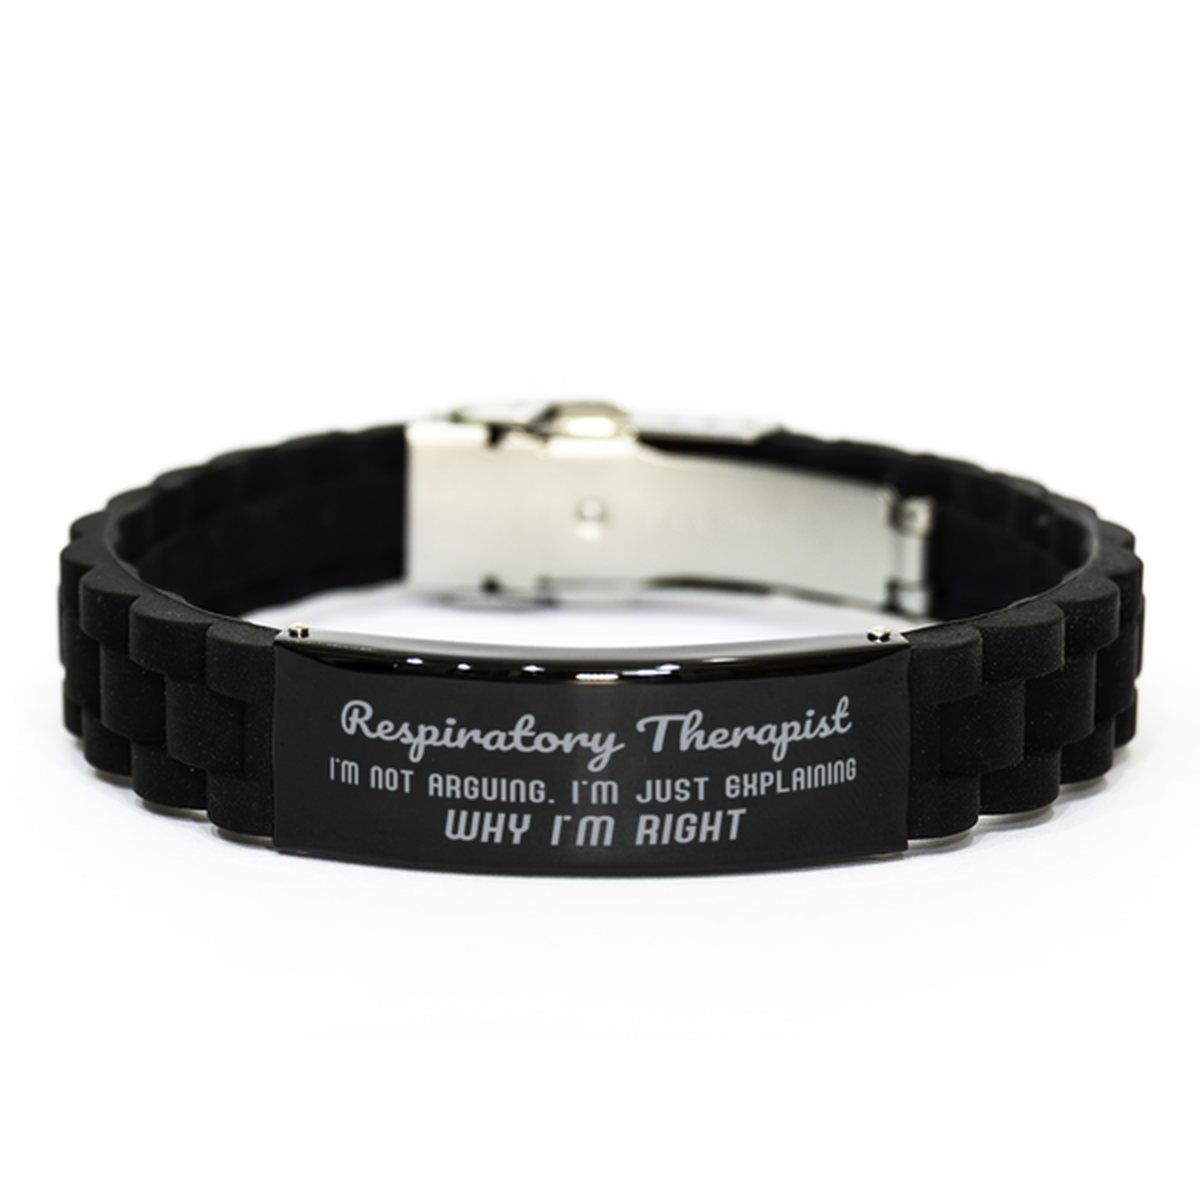 Respiratory Therapist I'm not Arguing. I'm Just Explaining Why I'm RIGHT Black Glidelock Clasp Bracelet, Funny Saying Quote Respiratory Therapist Gifts For Respiratory Therapist Graduation Birthday Christmas Gifts for Men Women Coworker